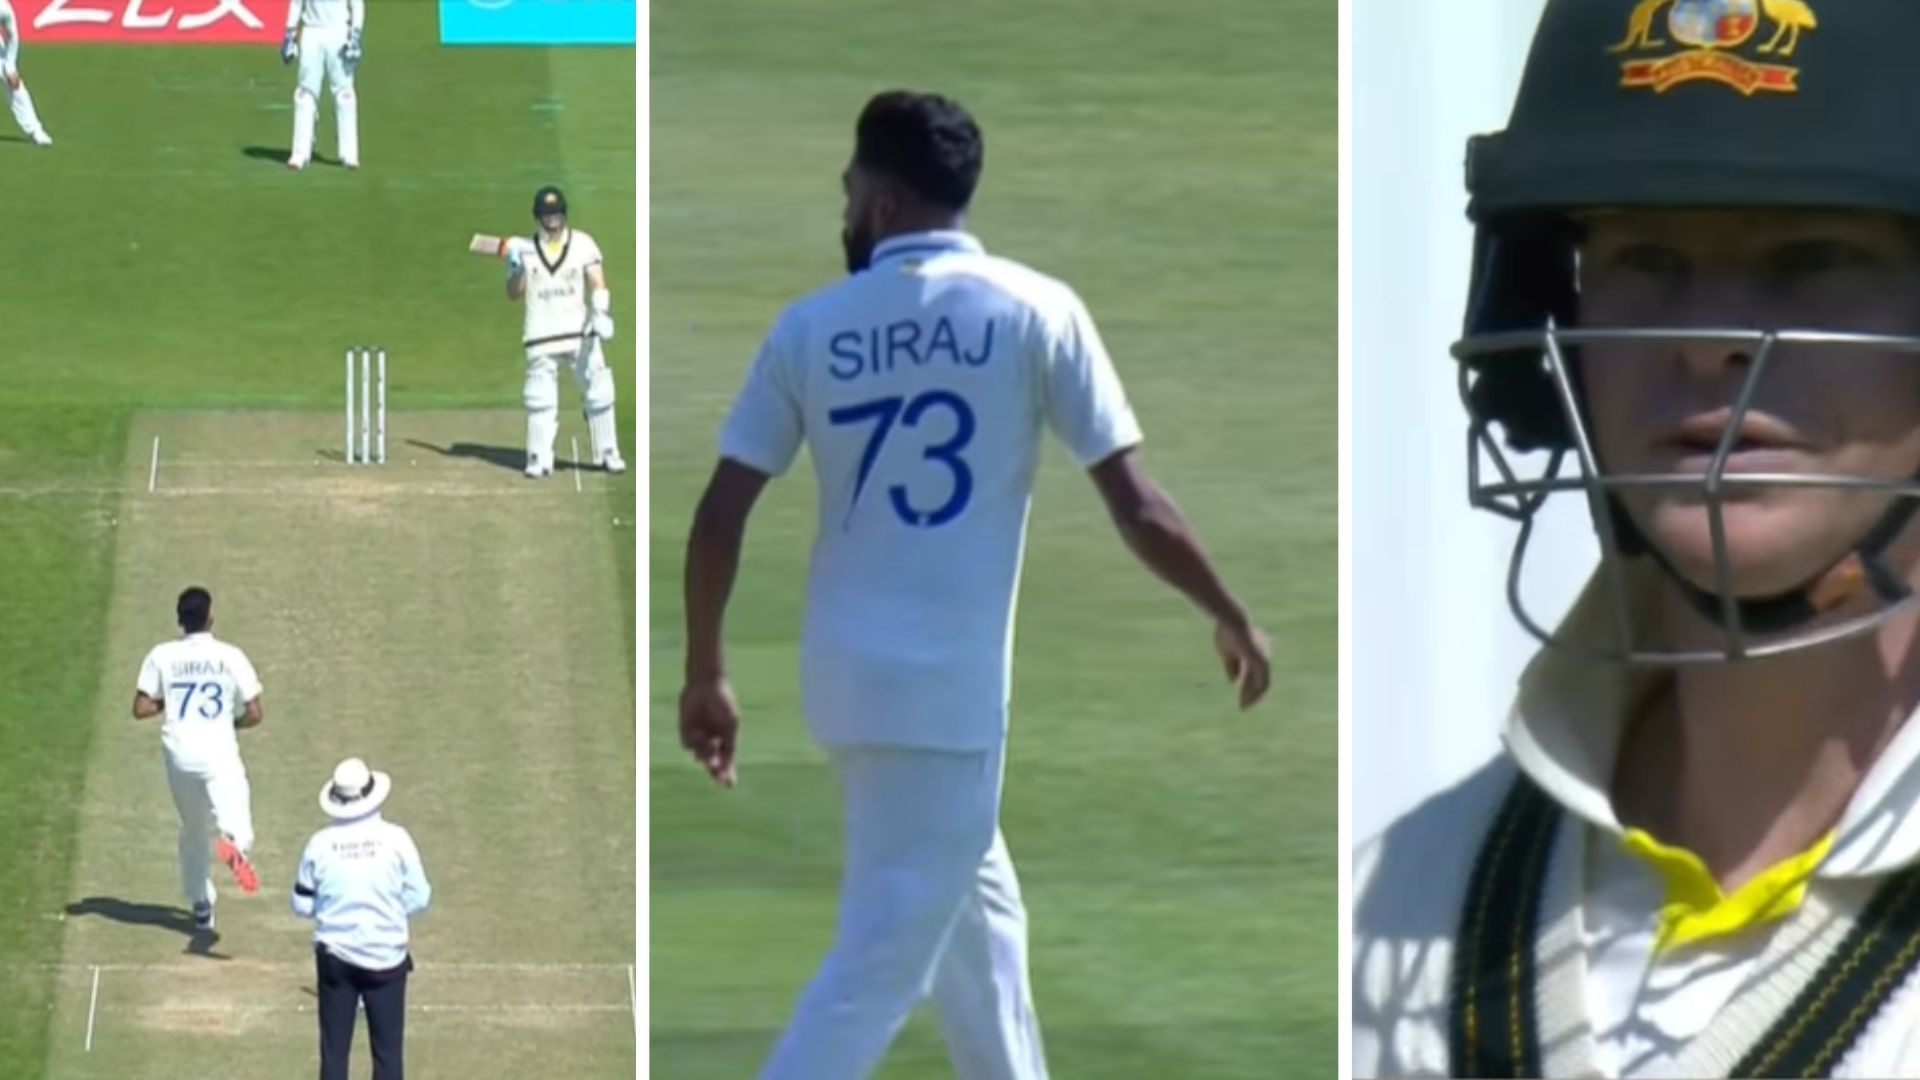 Snippets from video posted by ICC about Siraj and Smith